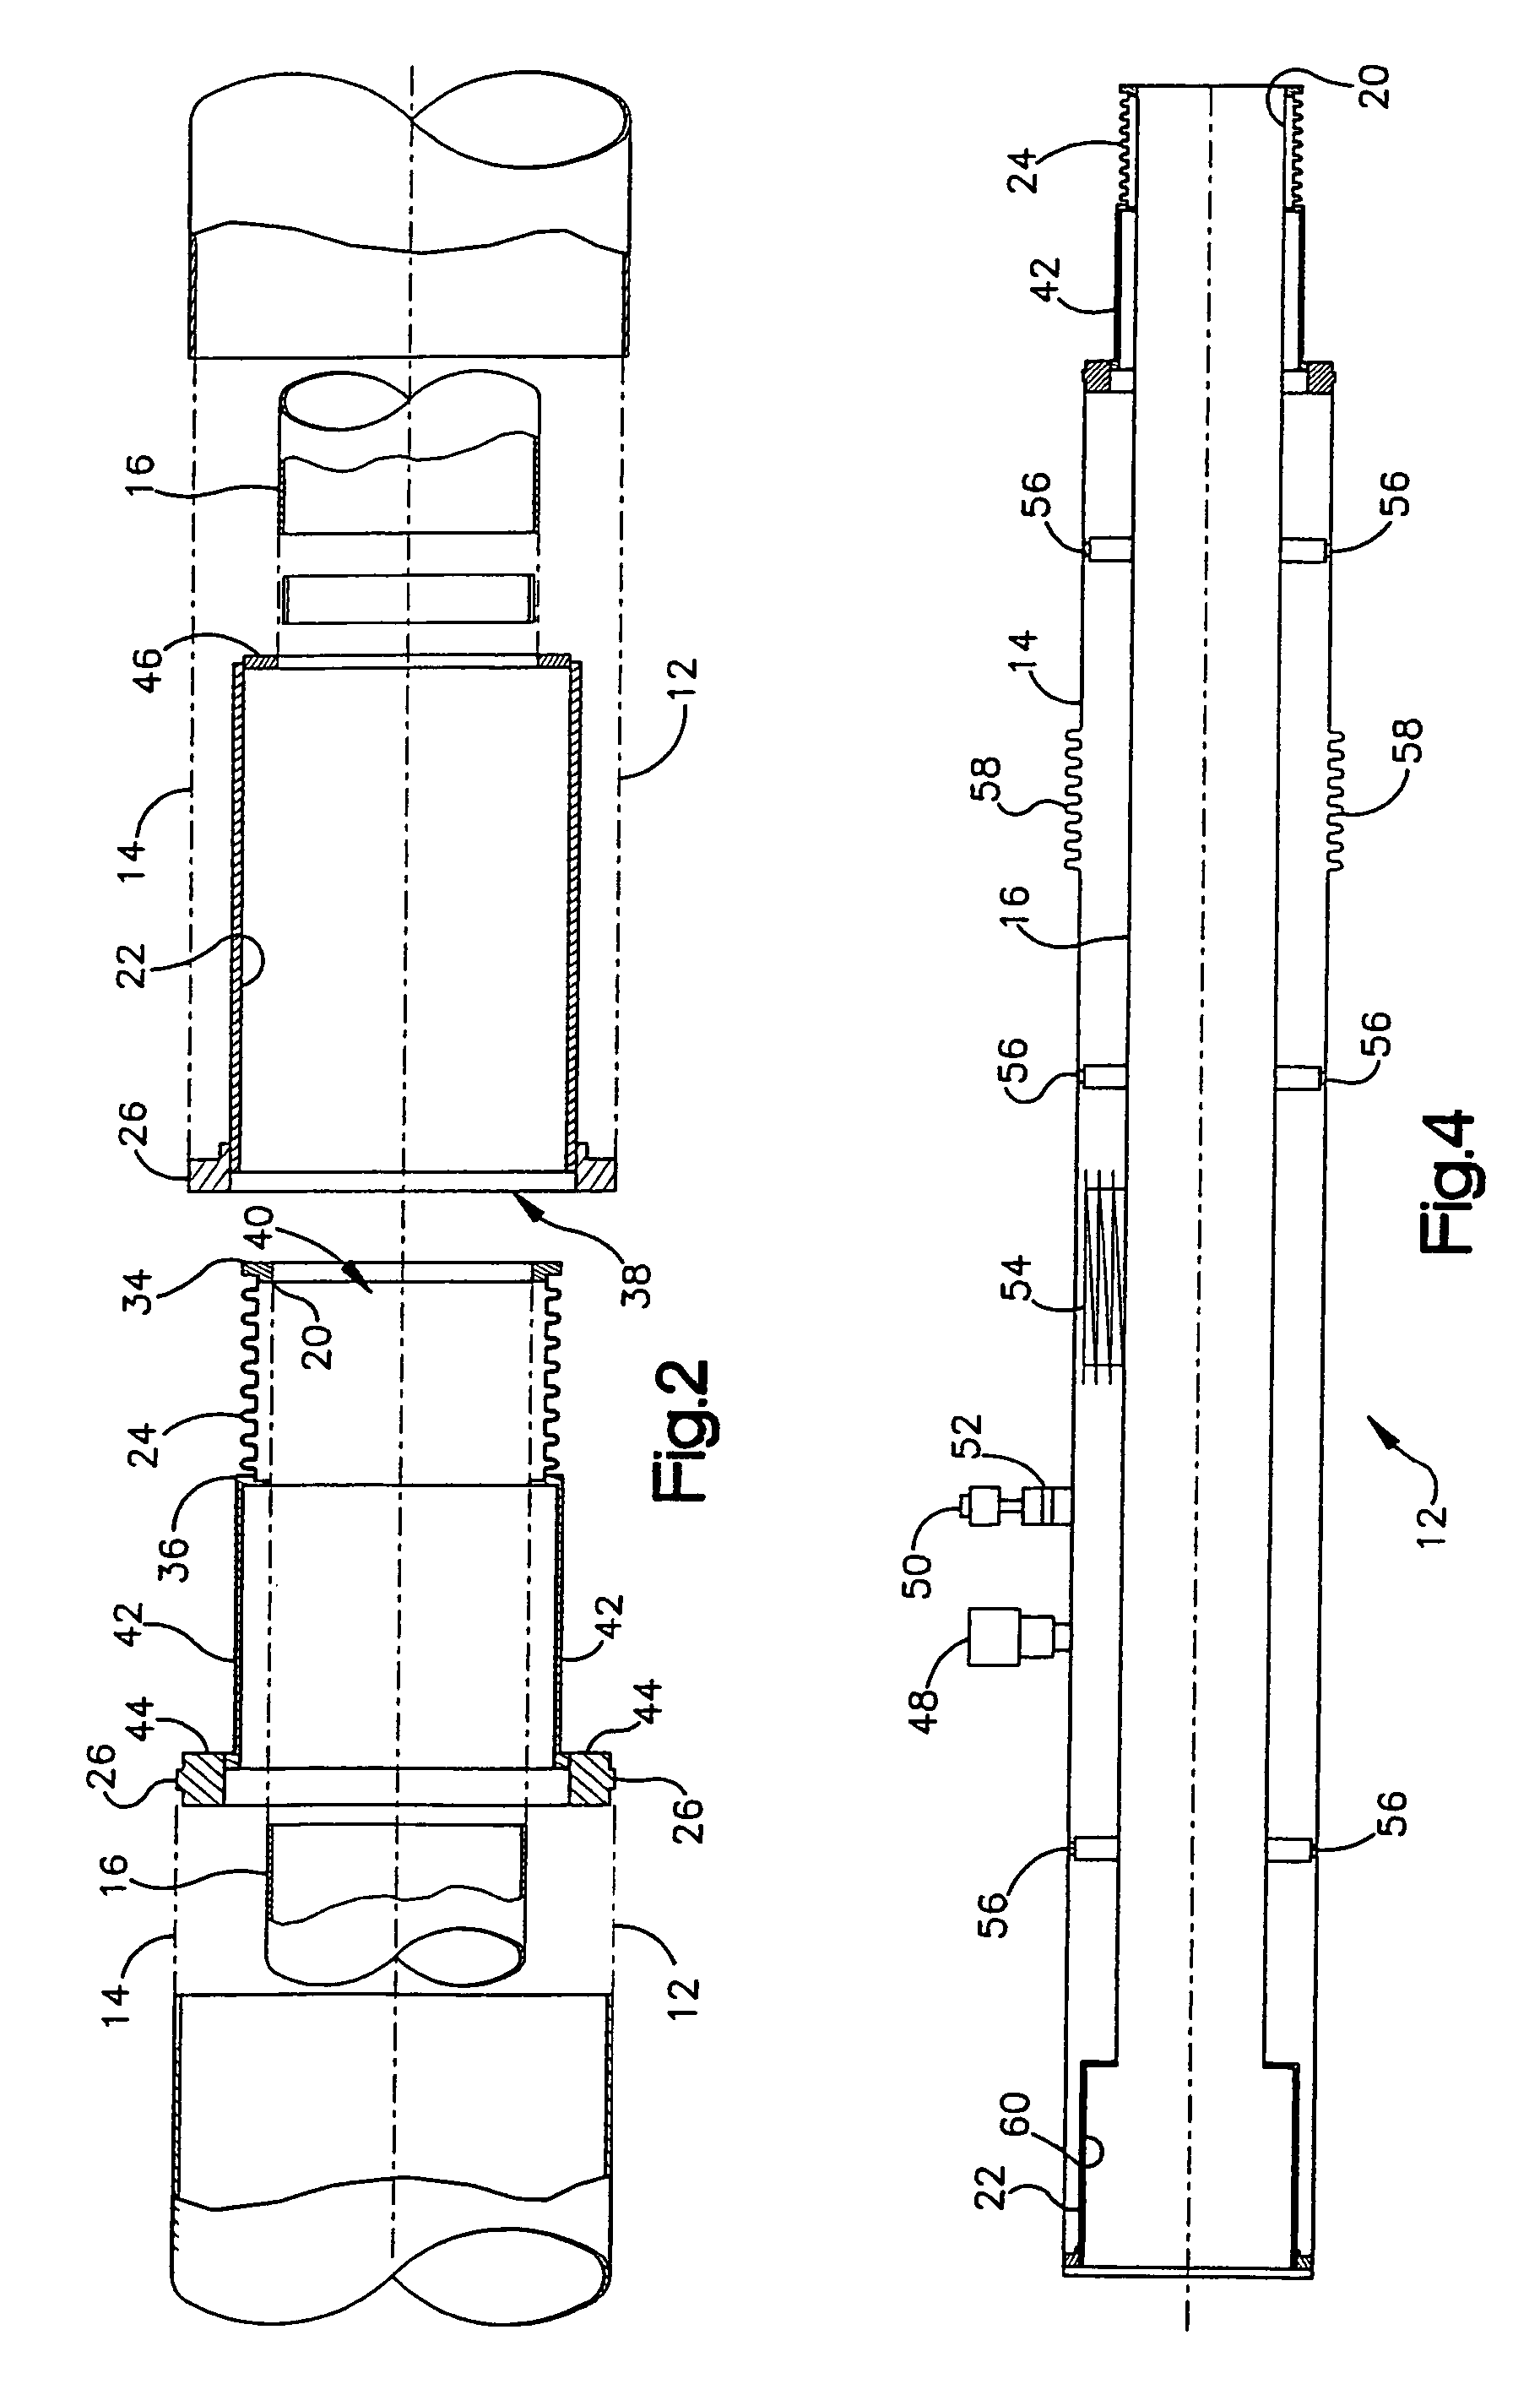 Cryogenic seal for vacuum-insulated pipe expansion bellows